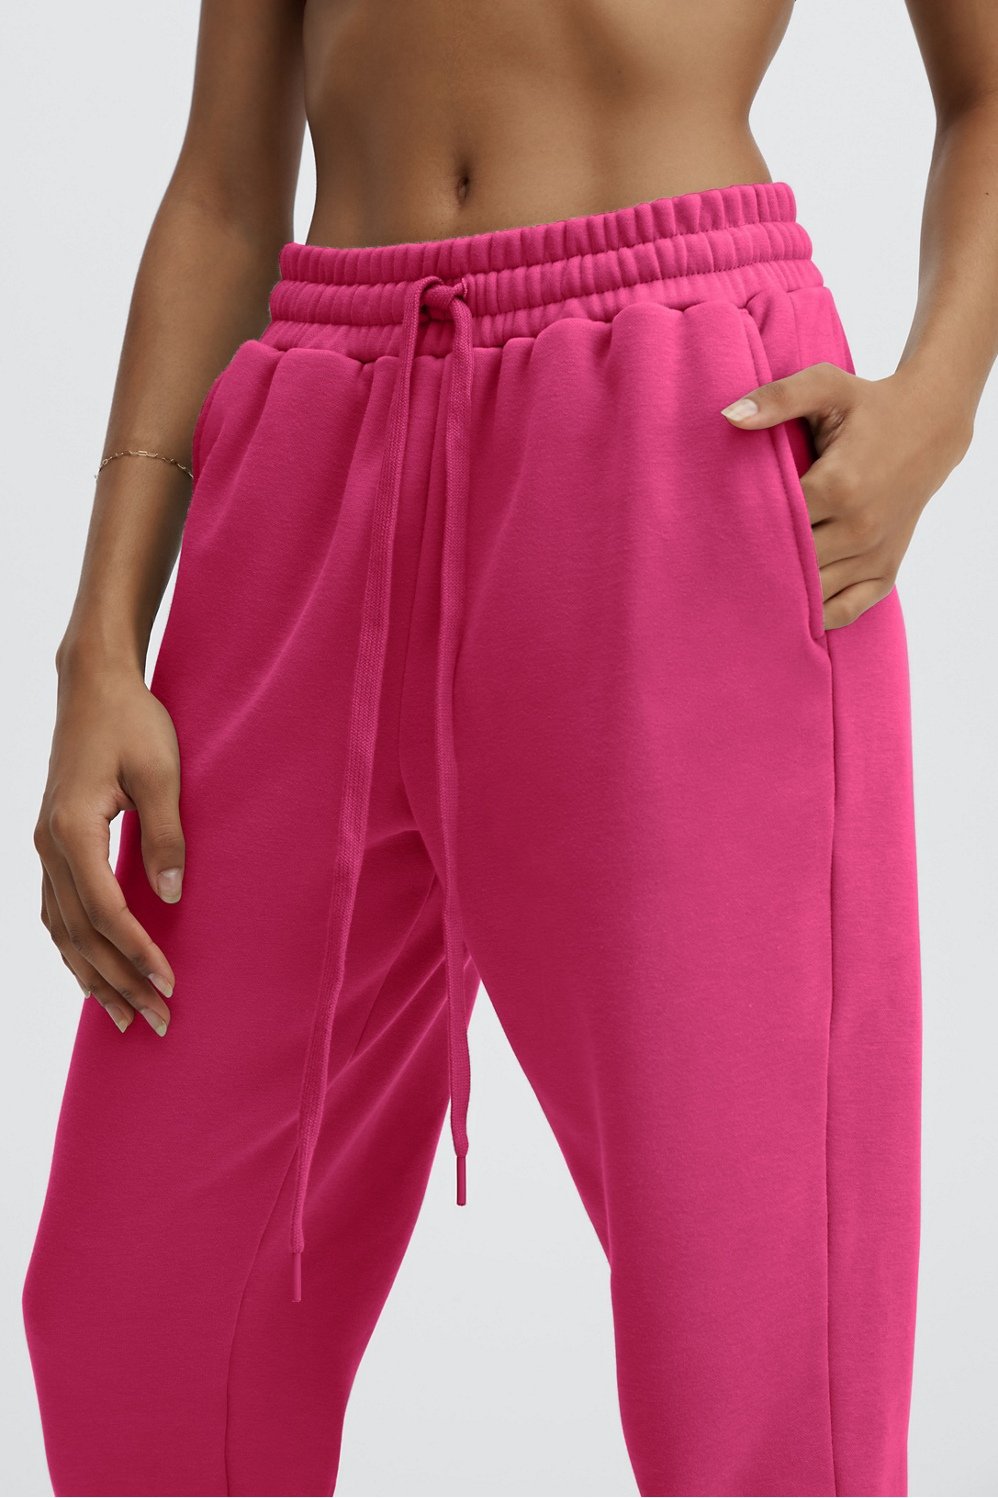 SAYOO Sweatpants Women'S Sexy Fit And Flare Pants Solid Color High